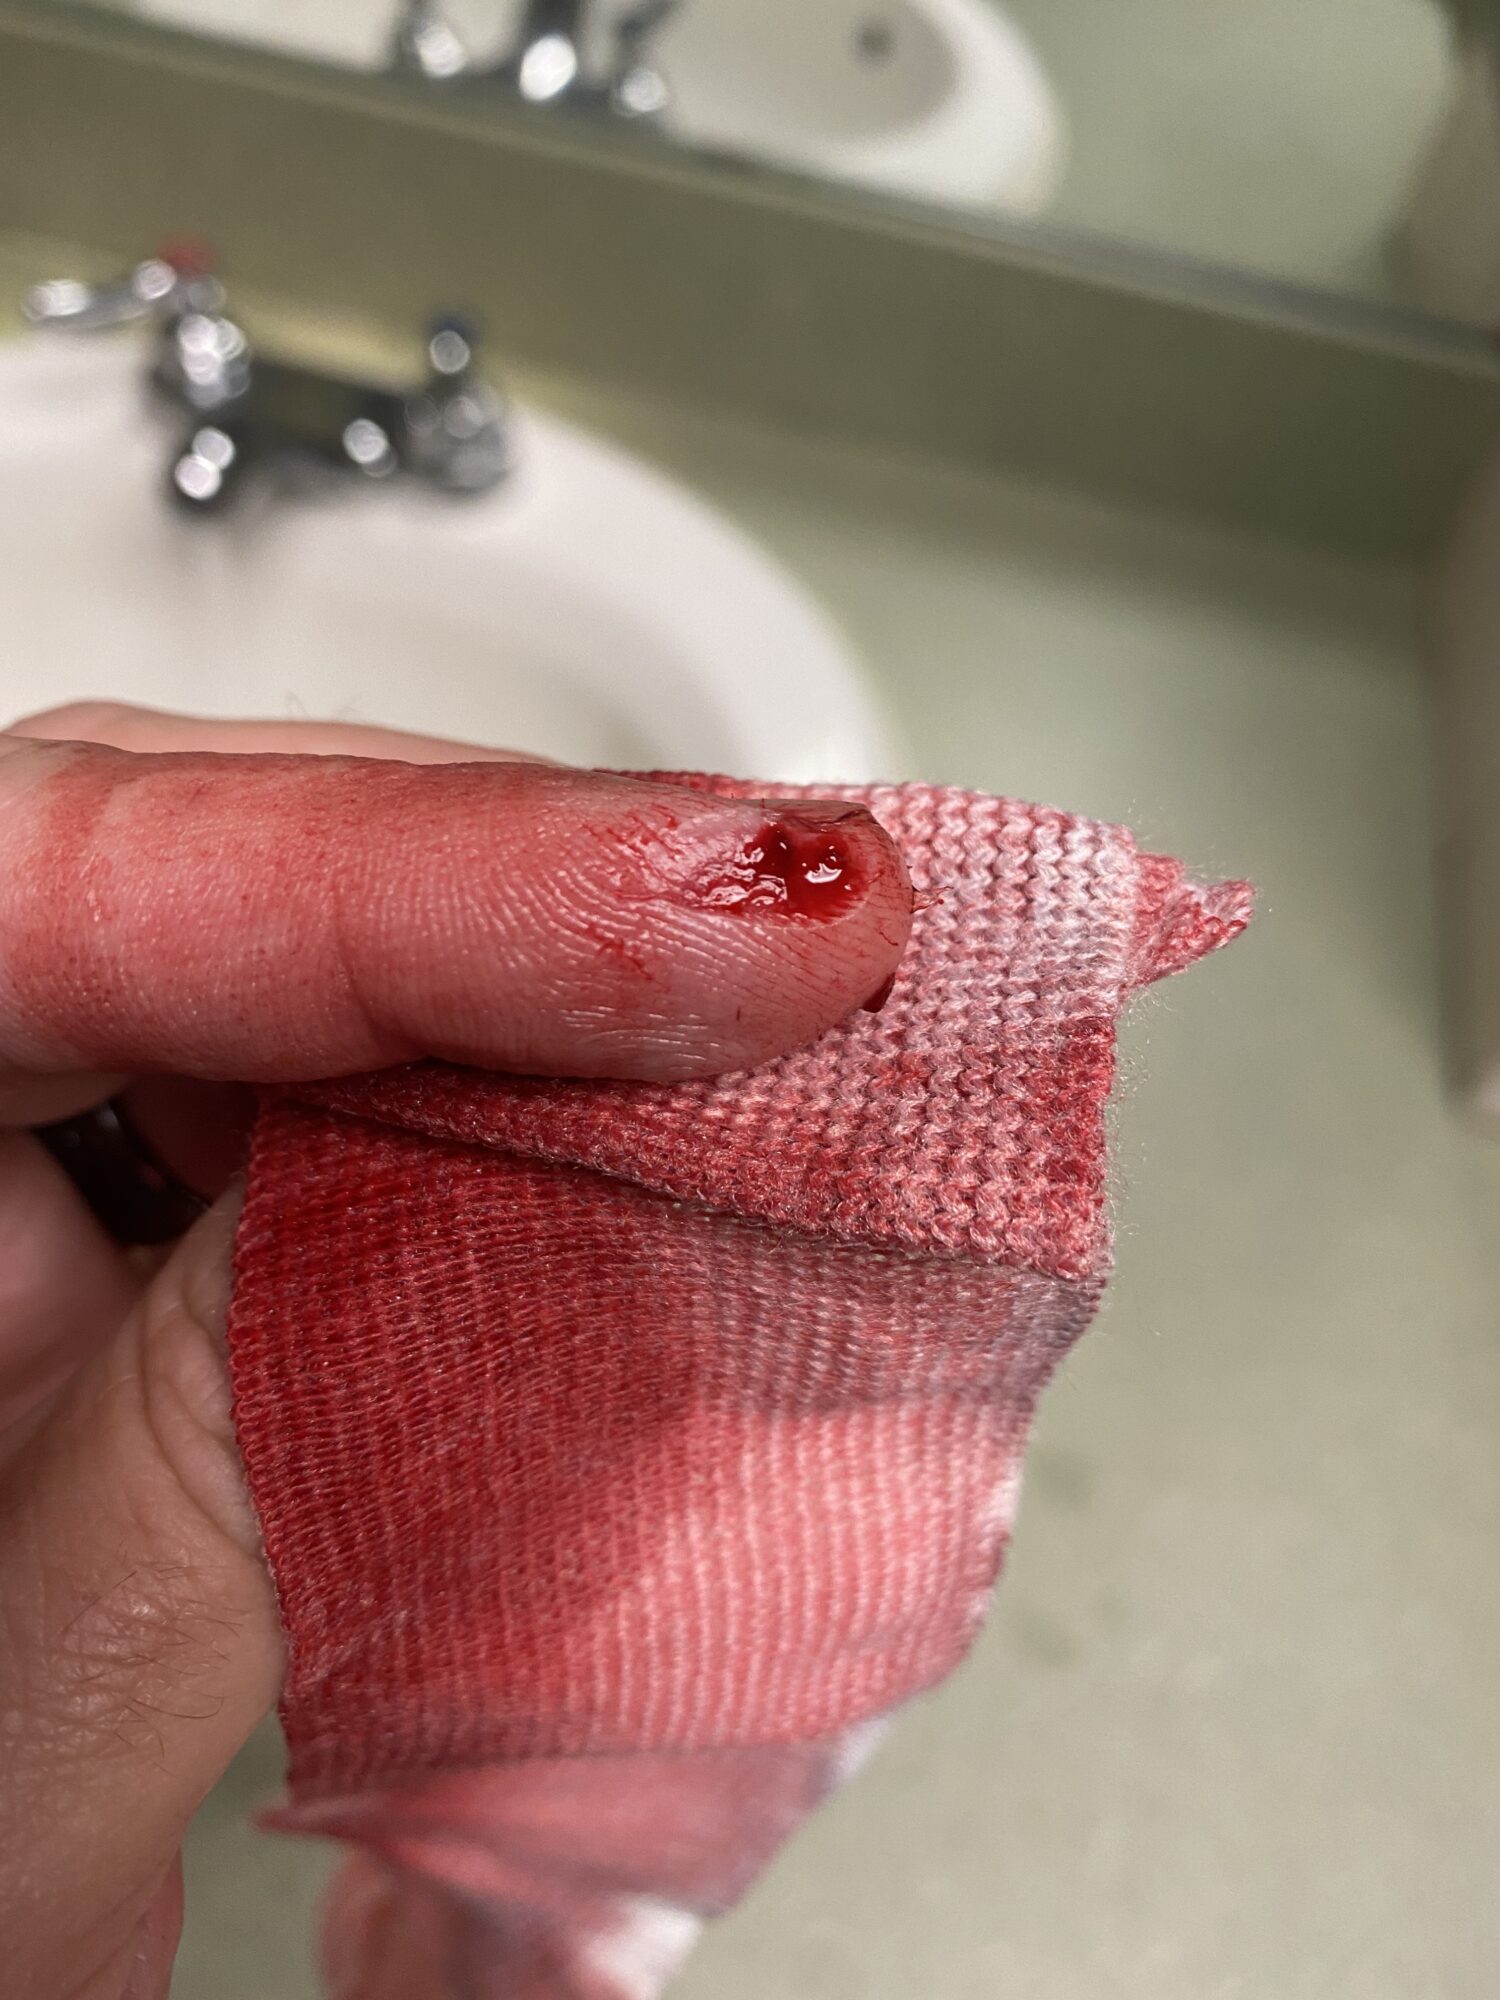 Cut finger from rotary cutter